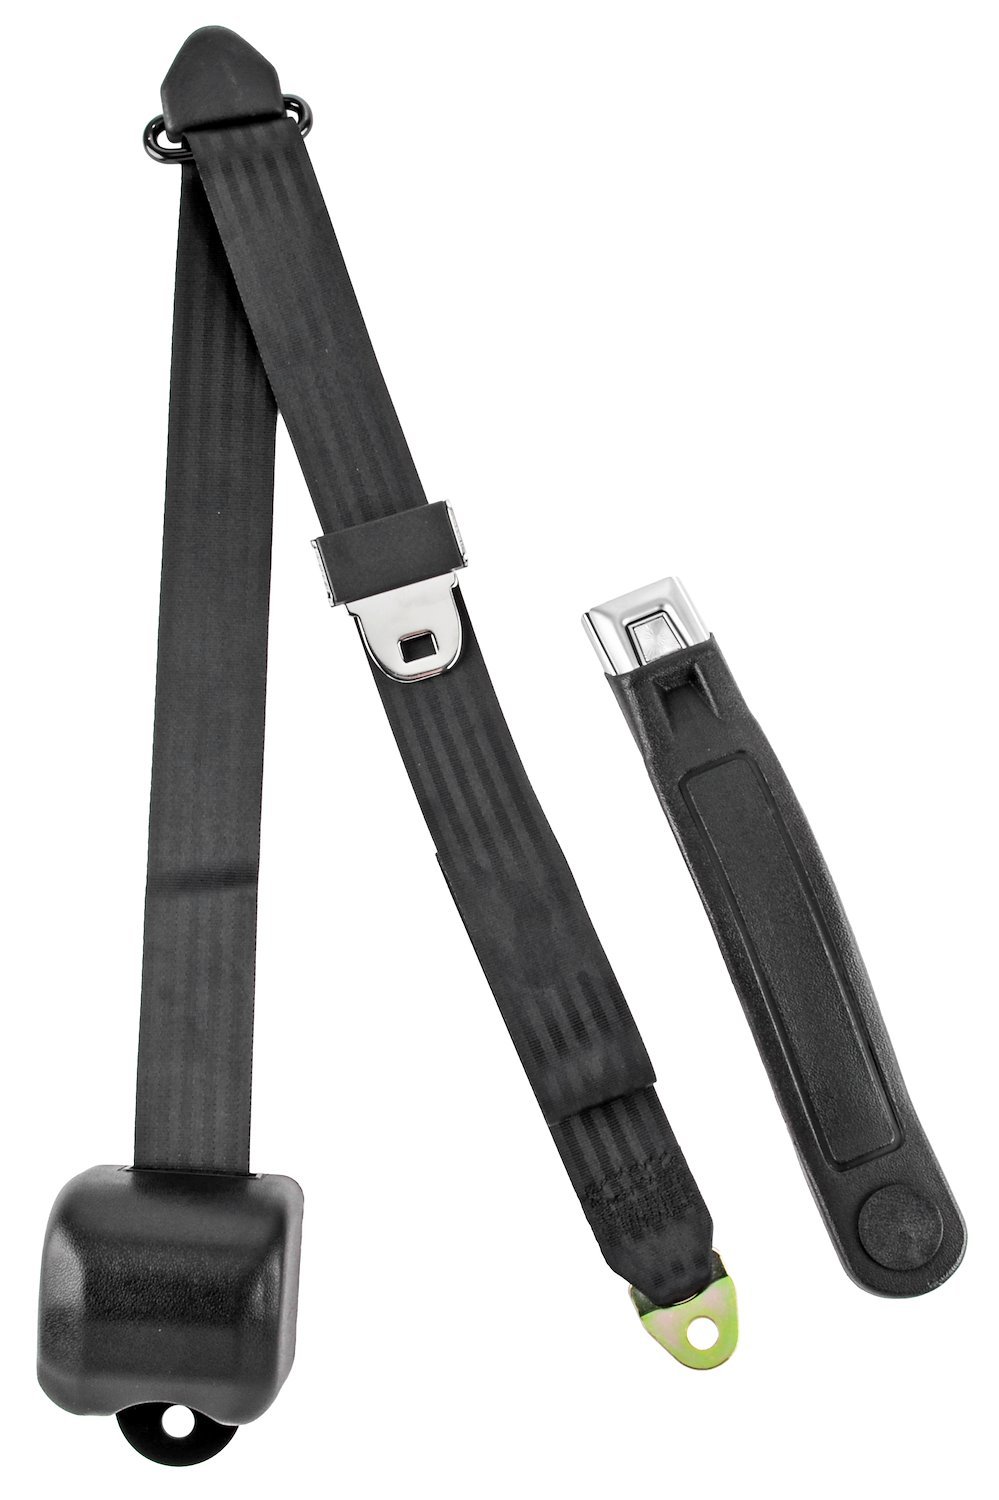 Universal 3 Point retractable seat belt and seat belt buckles - OEM  Seatbelts